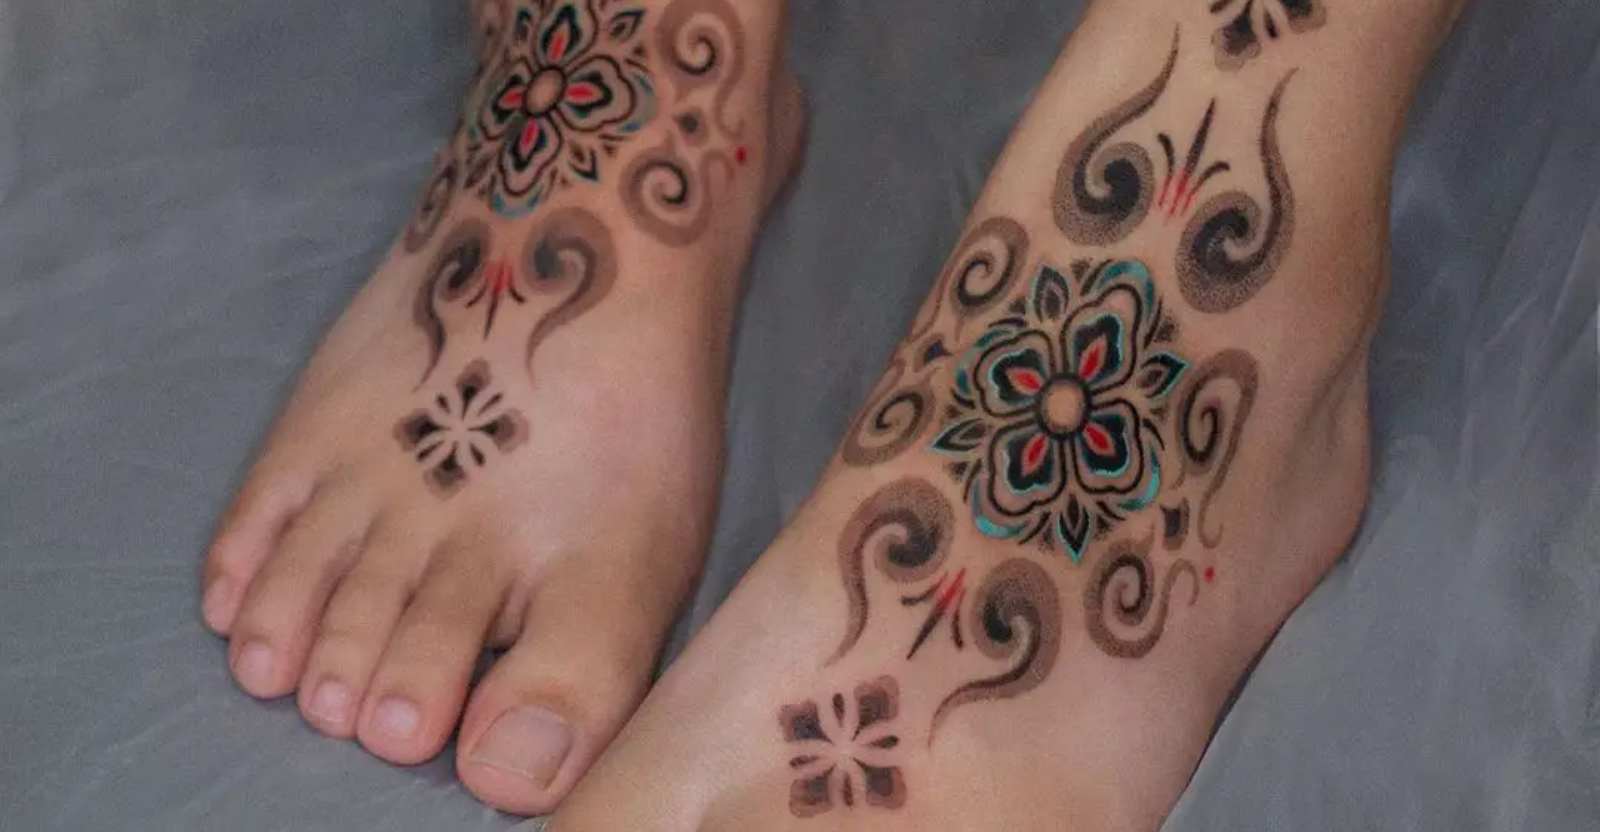 Feminine ornamental feet tattoos I did today | Gallery posted by Melly  TPTattoo | Lemon8